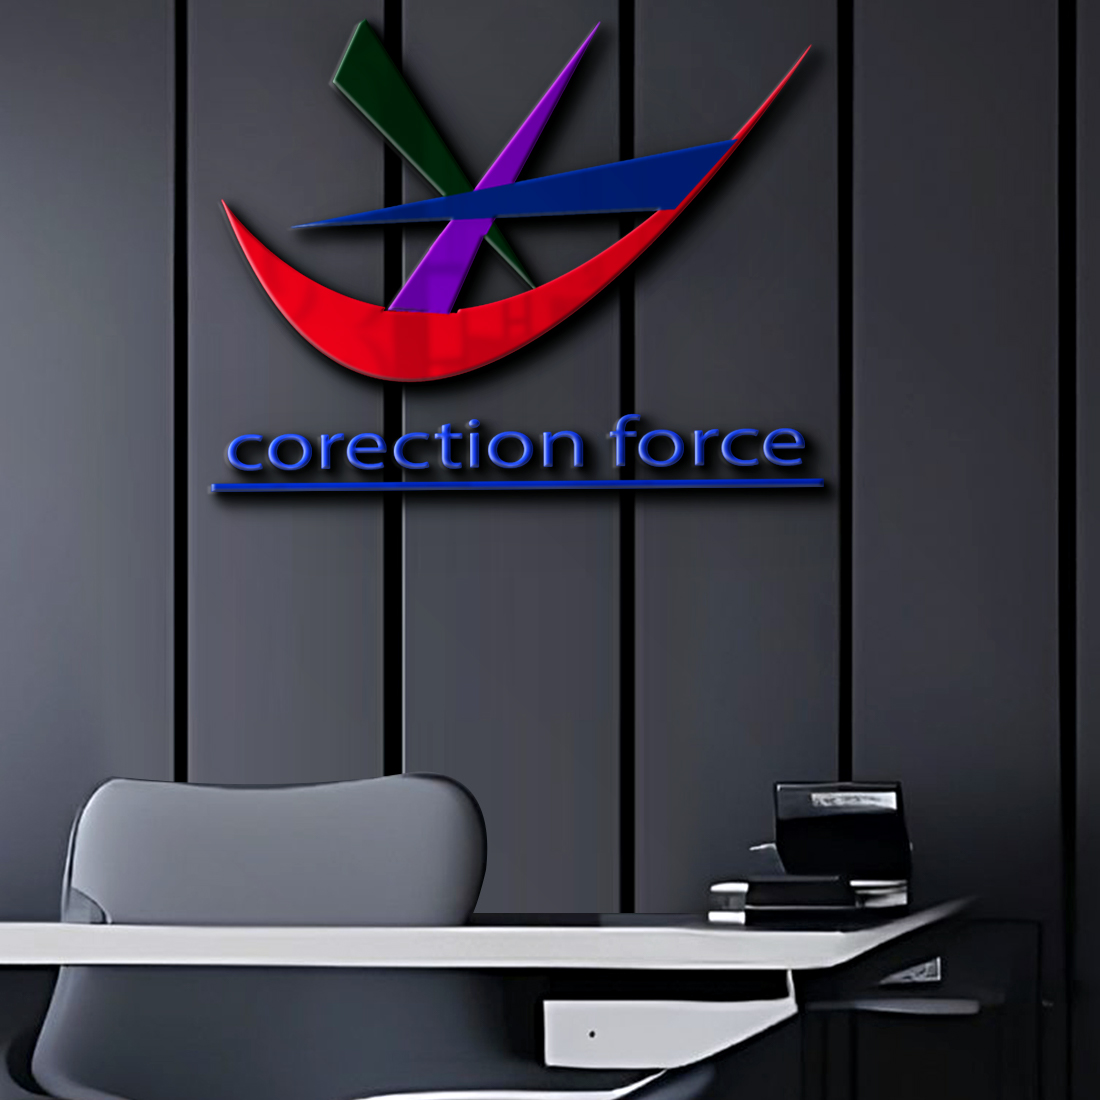 CORECTION FOURCE preview image.